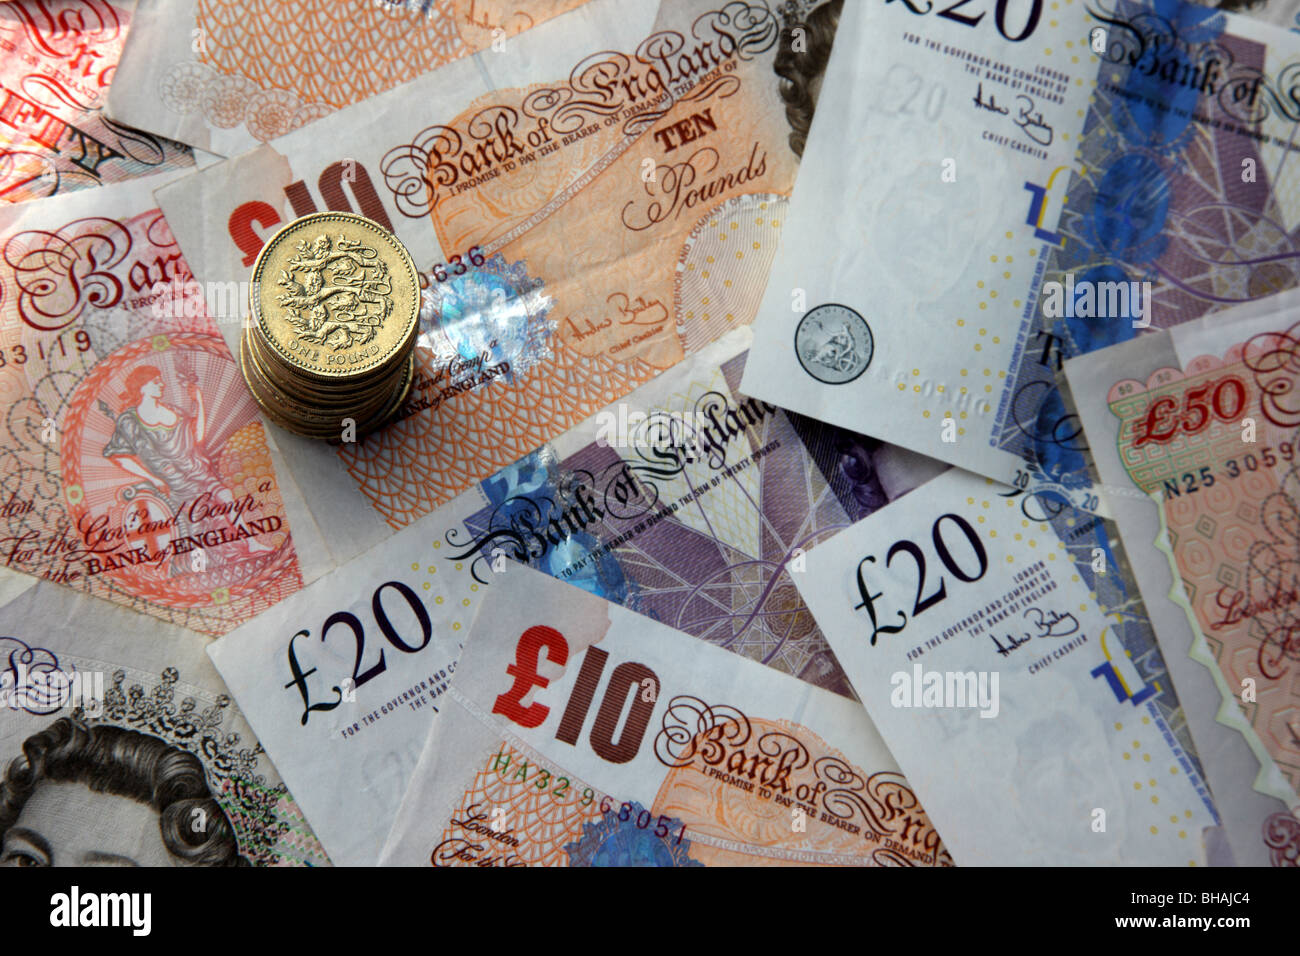 Stack of one pound coins on background of fifty, twenty and ten pound notes. Stock Photo